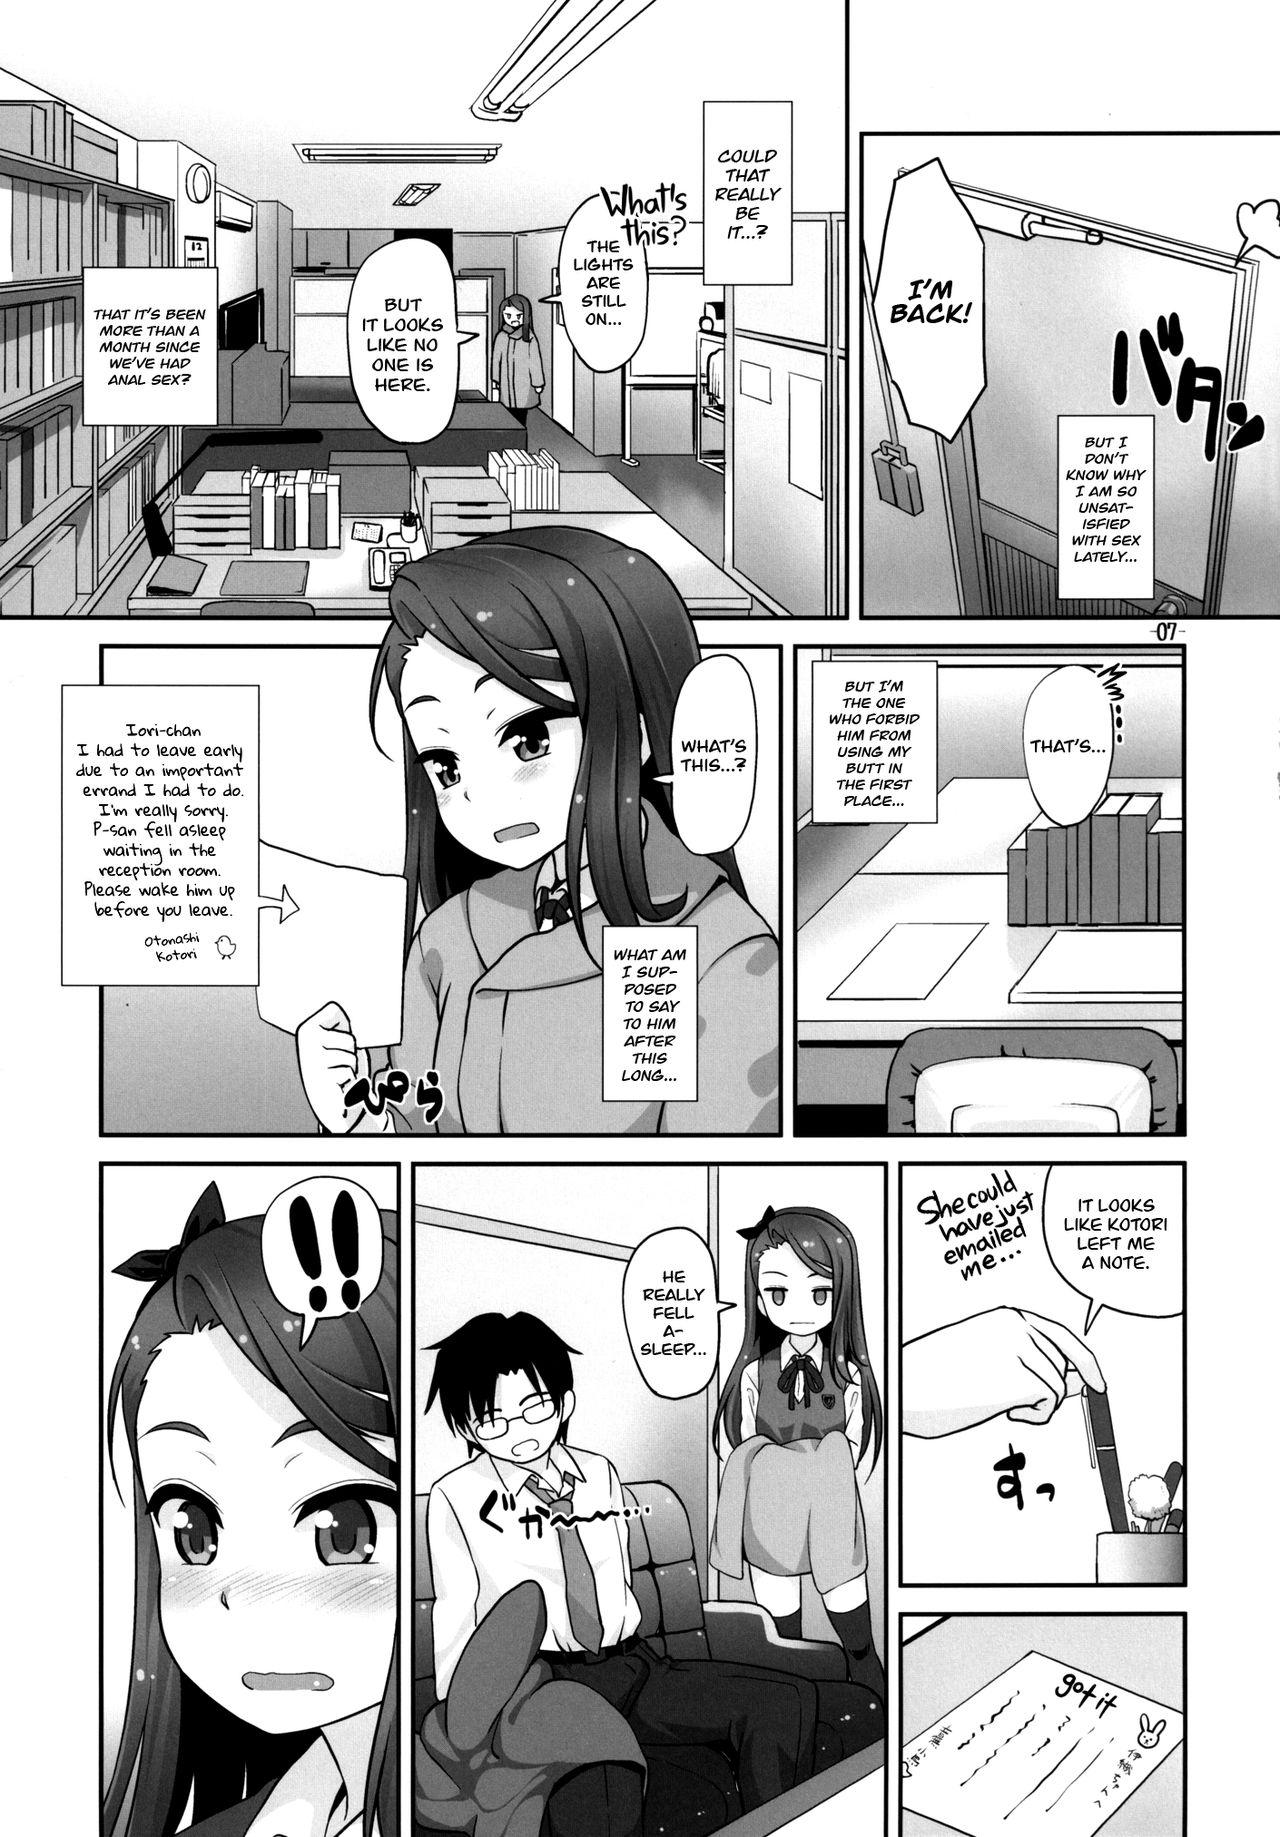 Exposed iorix NUA - The idolmaster Gay Pawnshop - Page 6